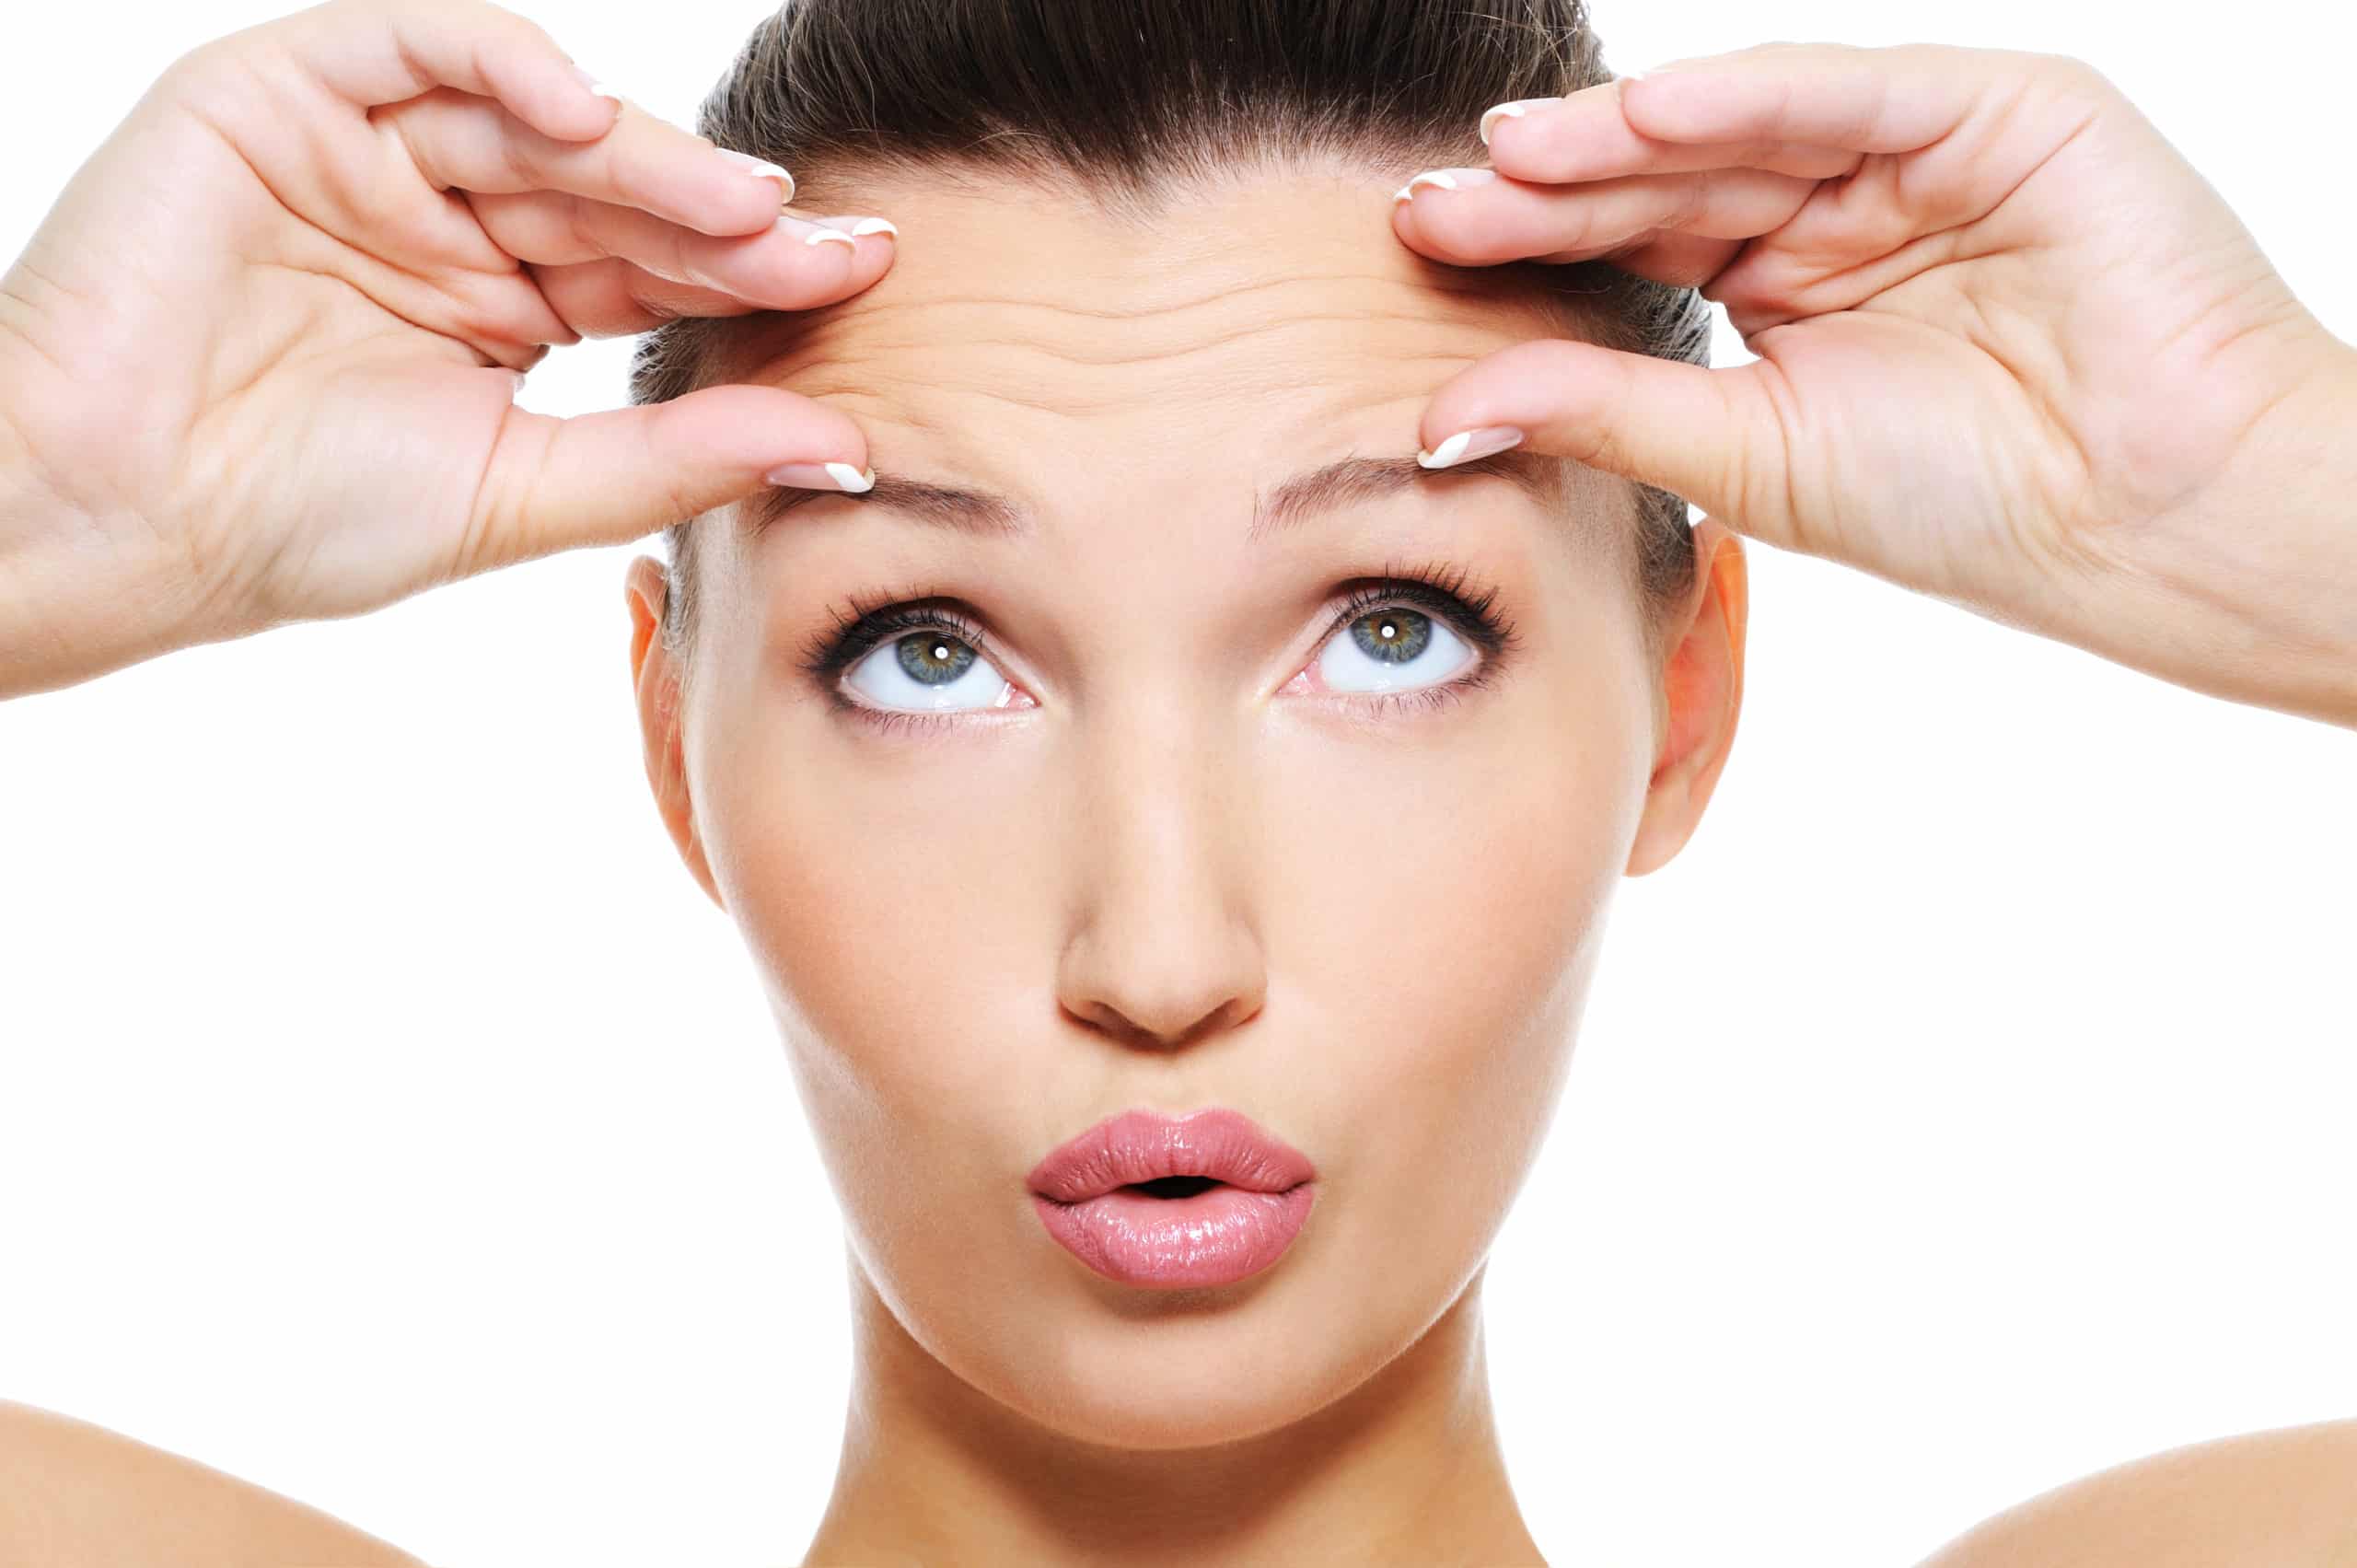 Female with wrinkles on her forehead | Skynn MD Medspa and Wellness